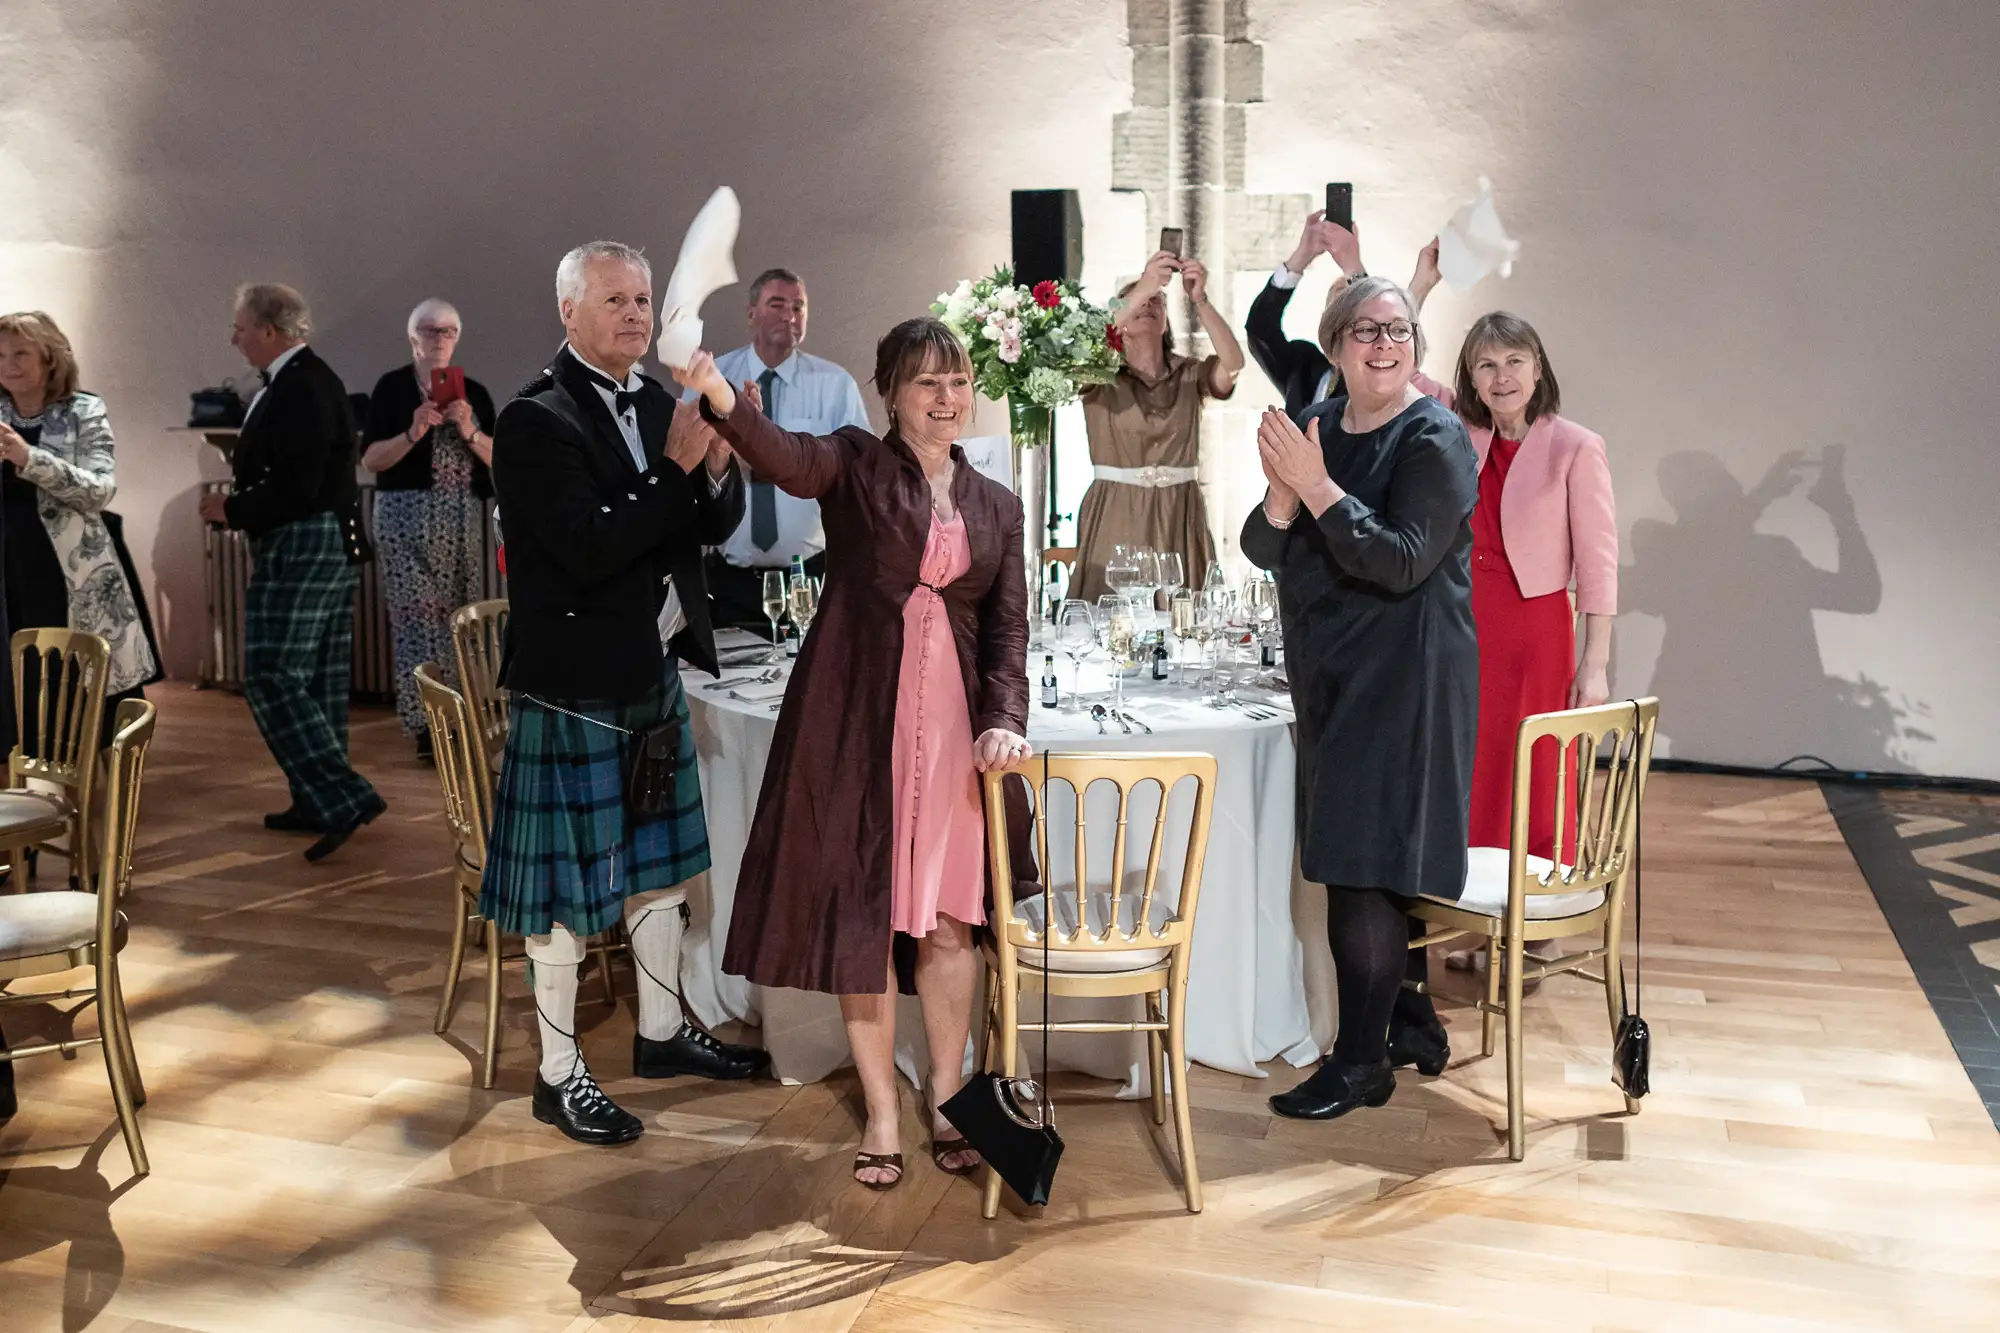 Guests dancing and clapping around a banquet table at a formal event, some wearing traditional scottish attire.